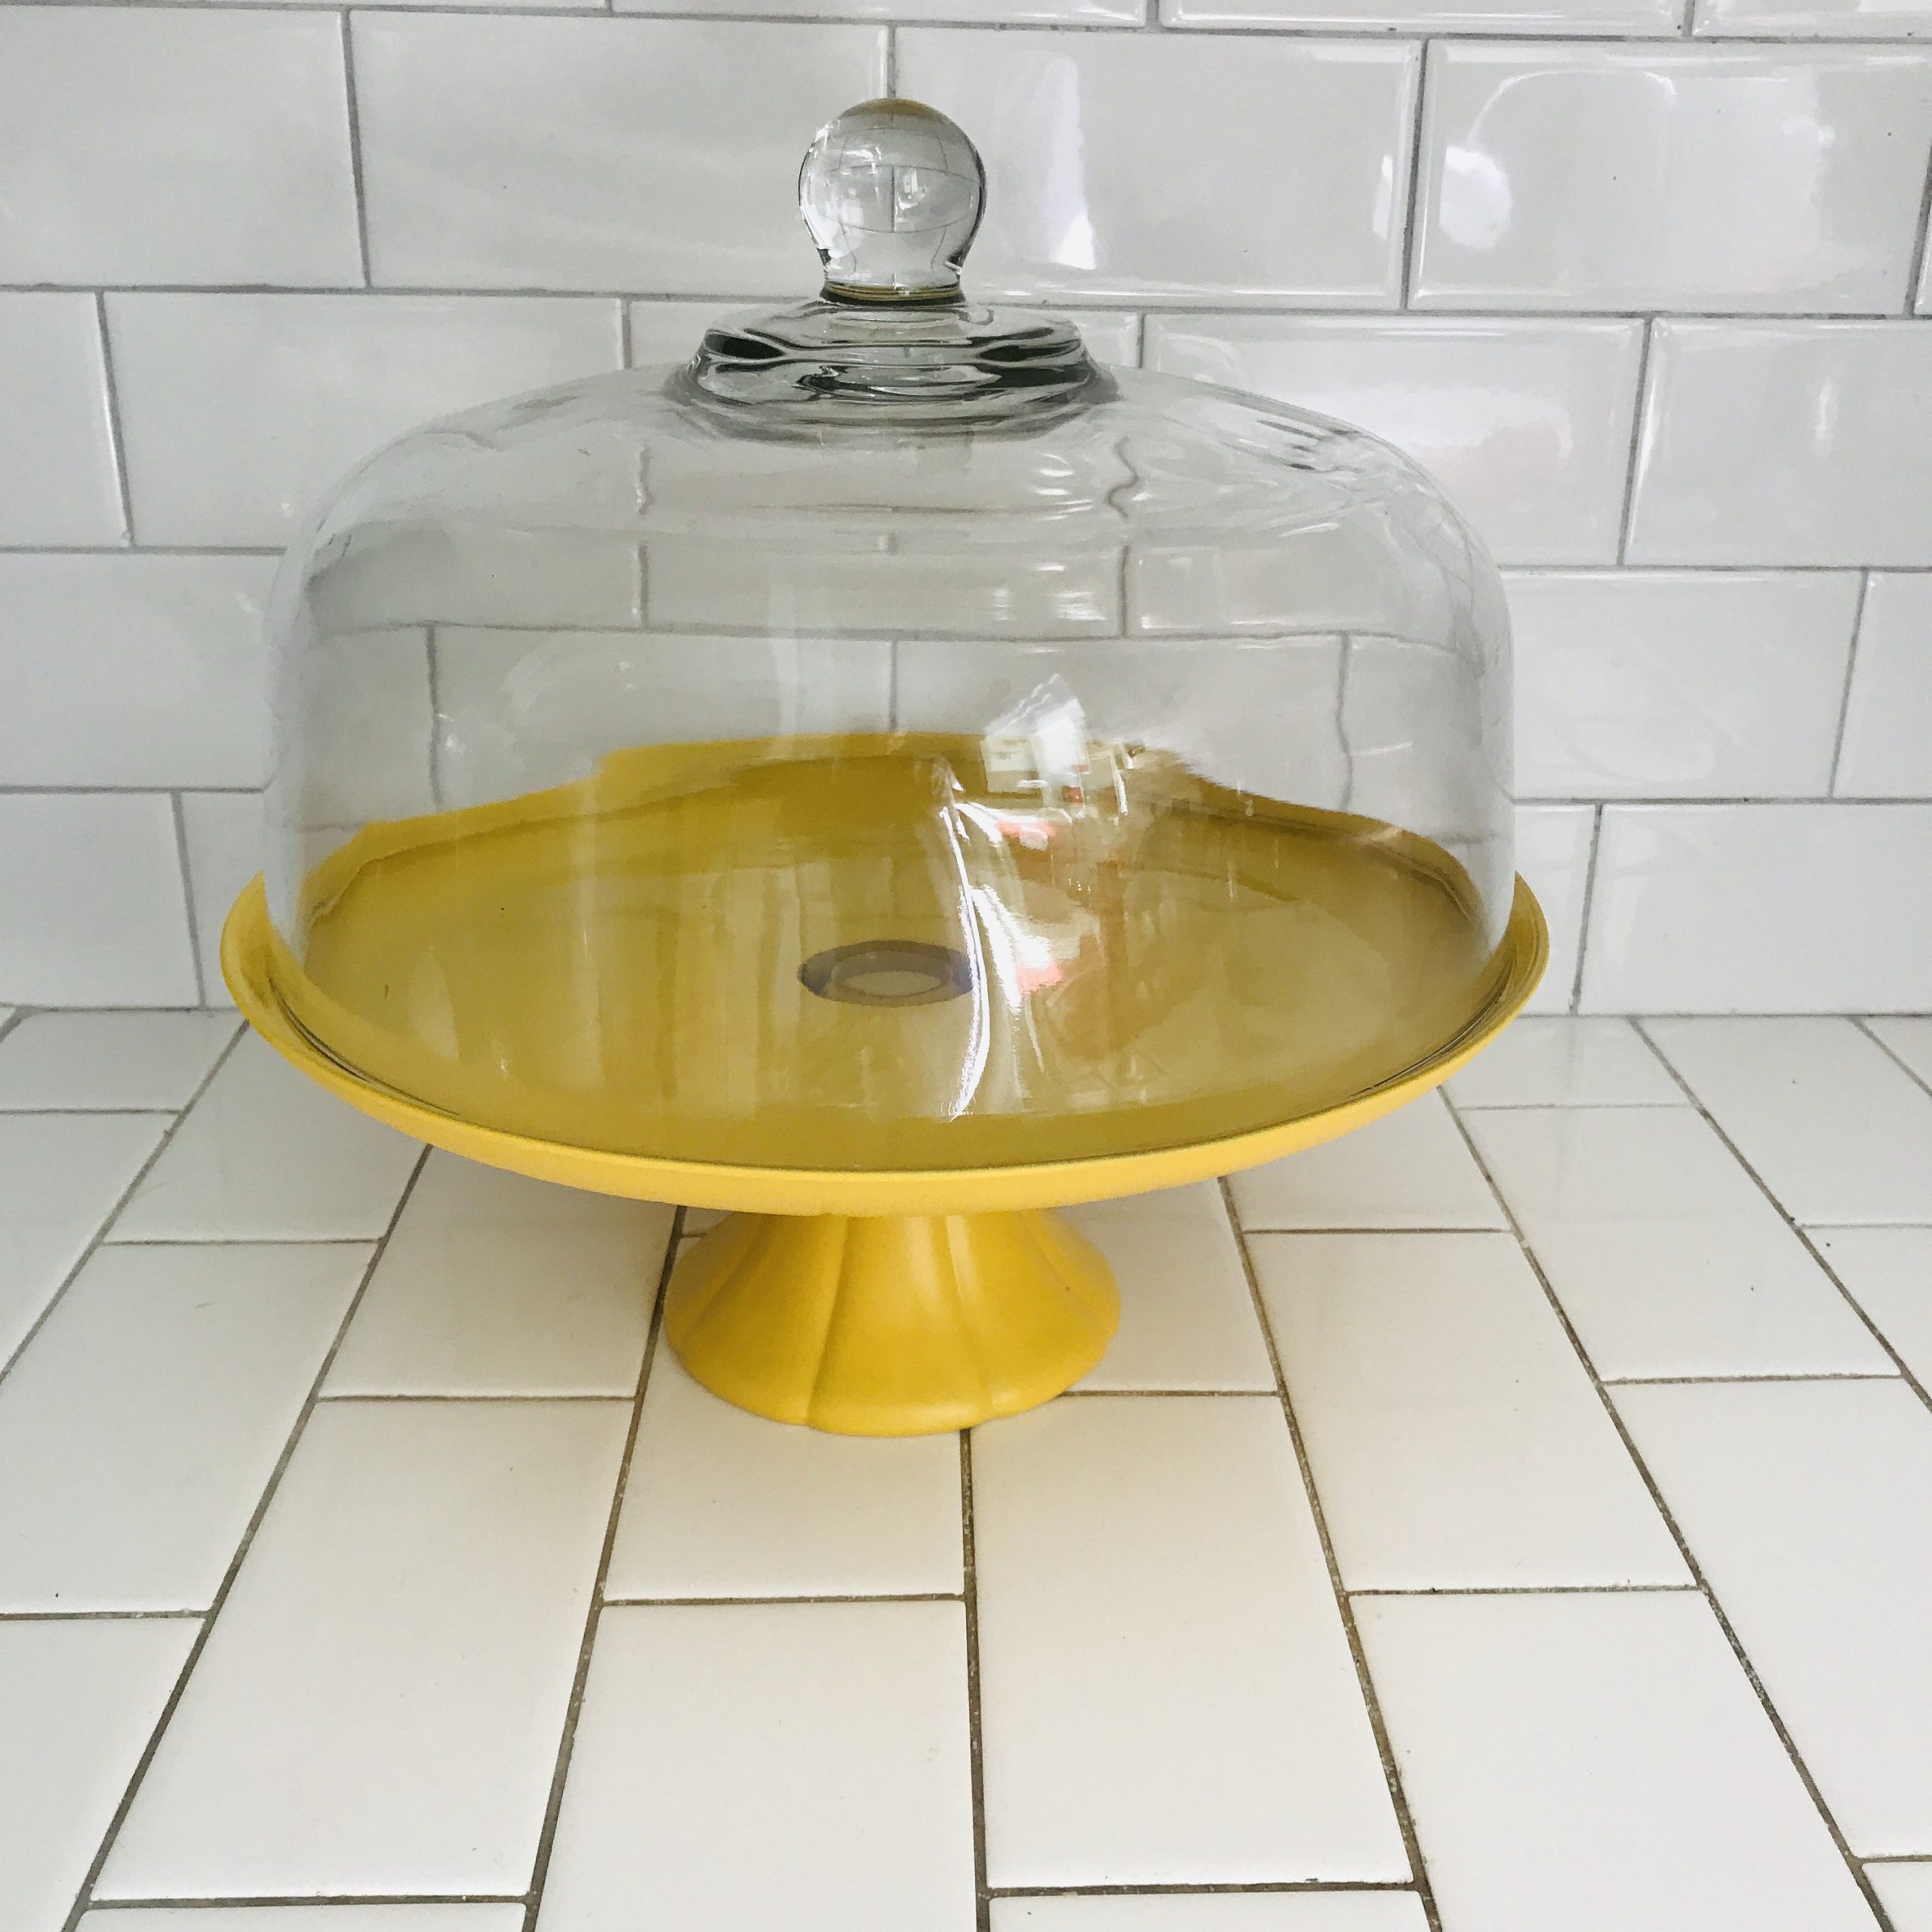 Anchor Hocking Wexford Glass Cake Stand